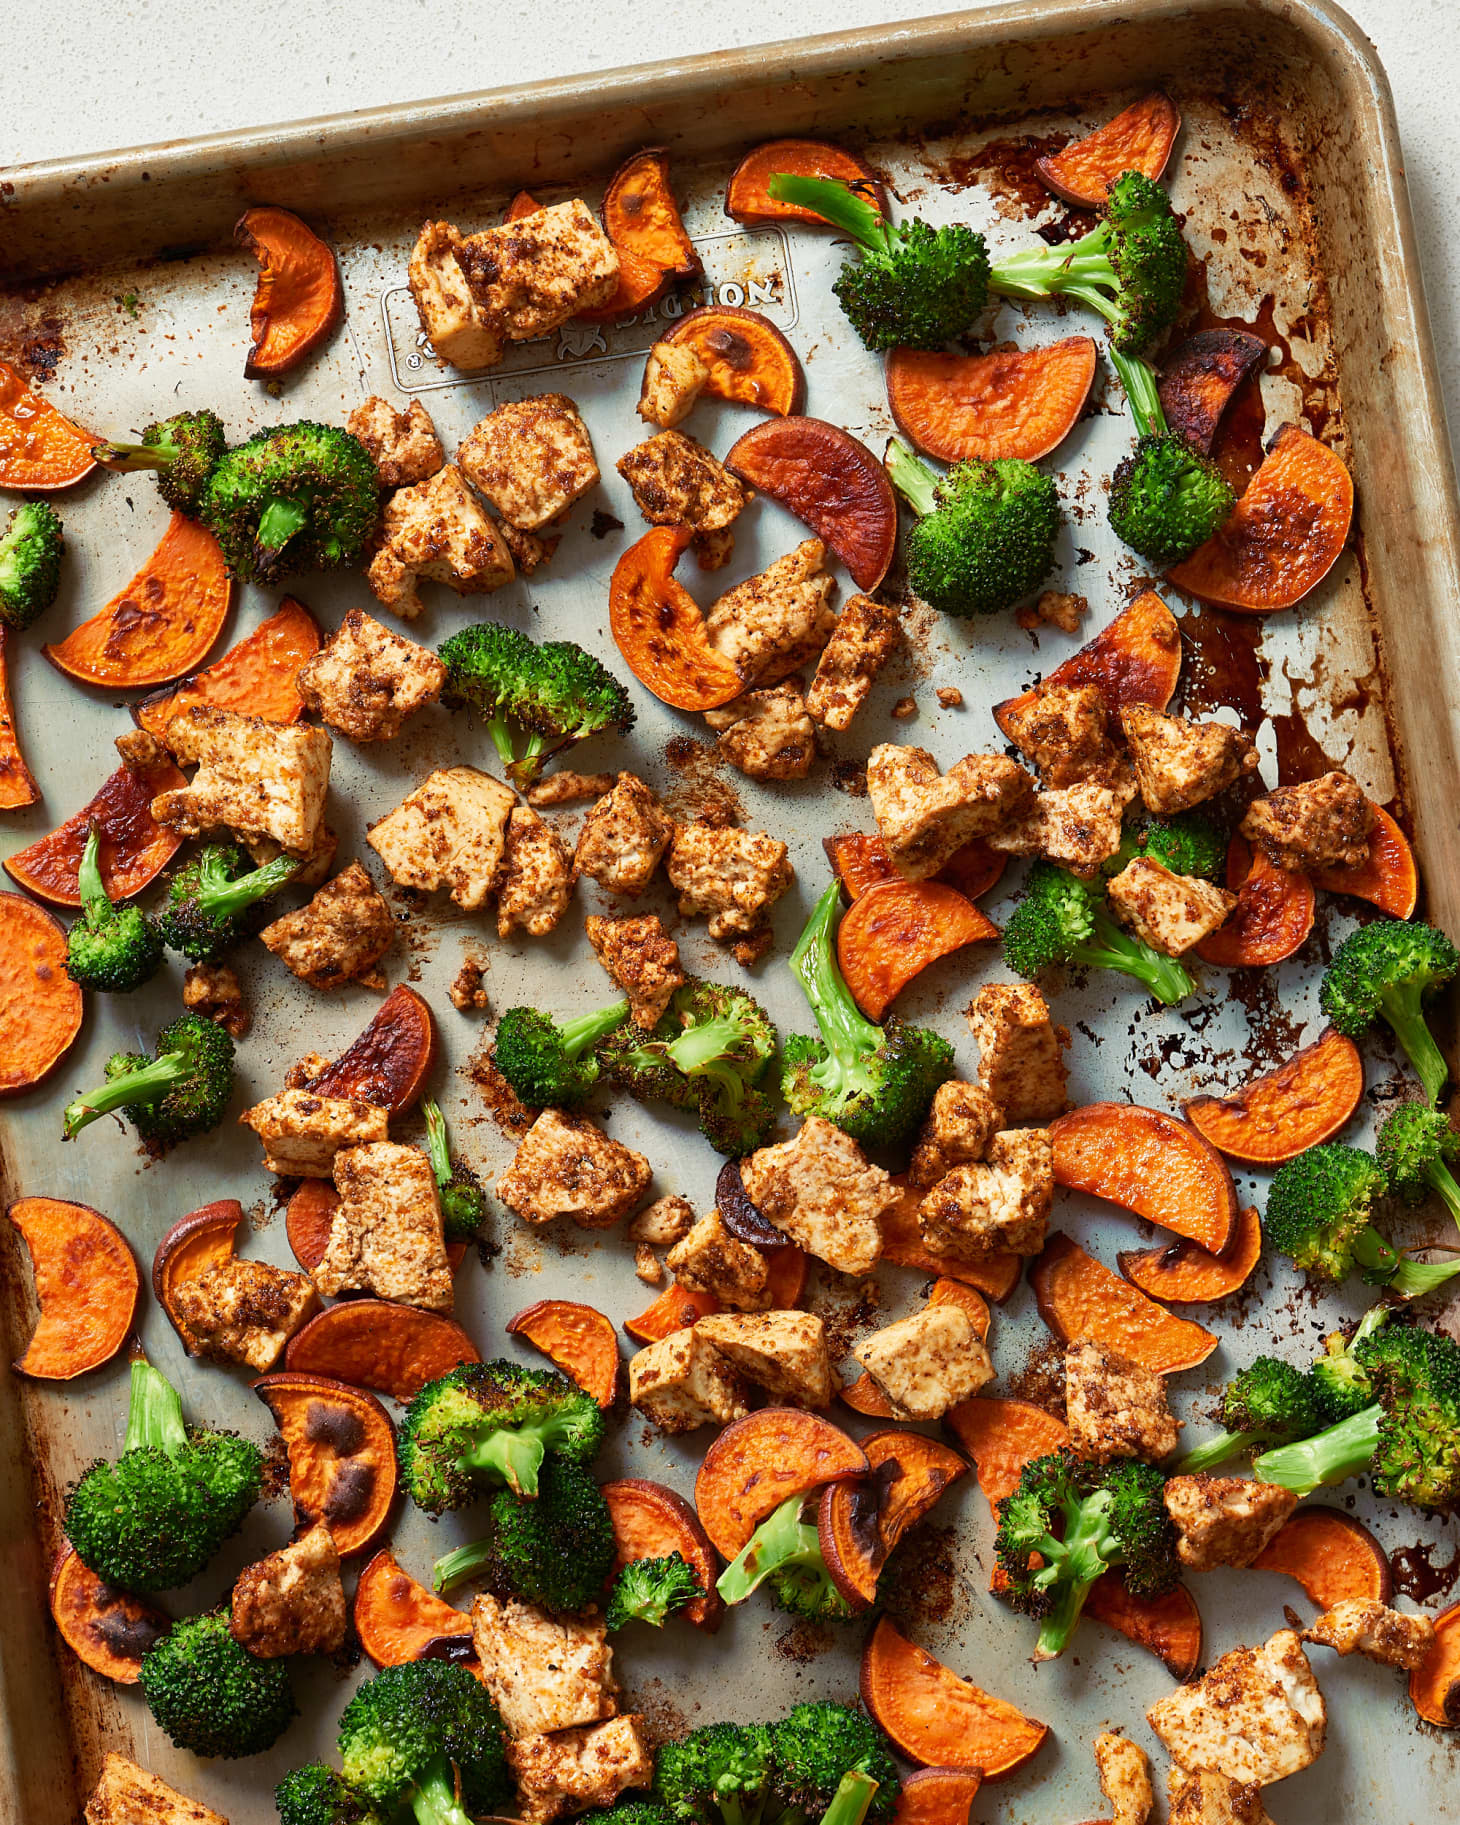 bbq tofu and veggies from the kitchn